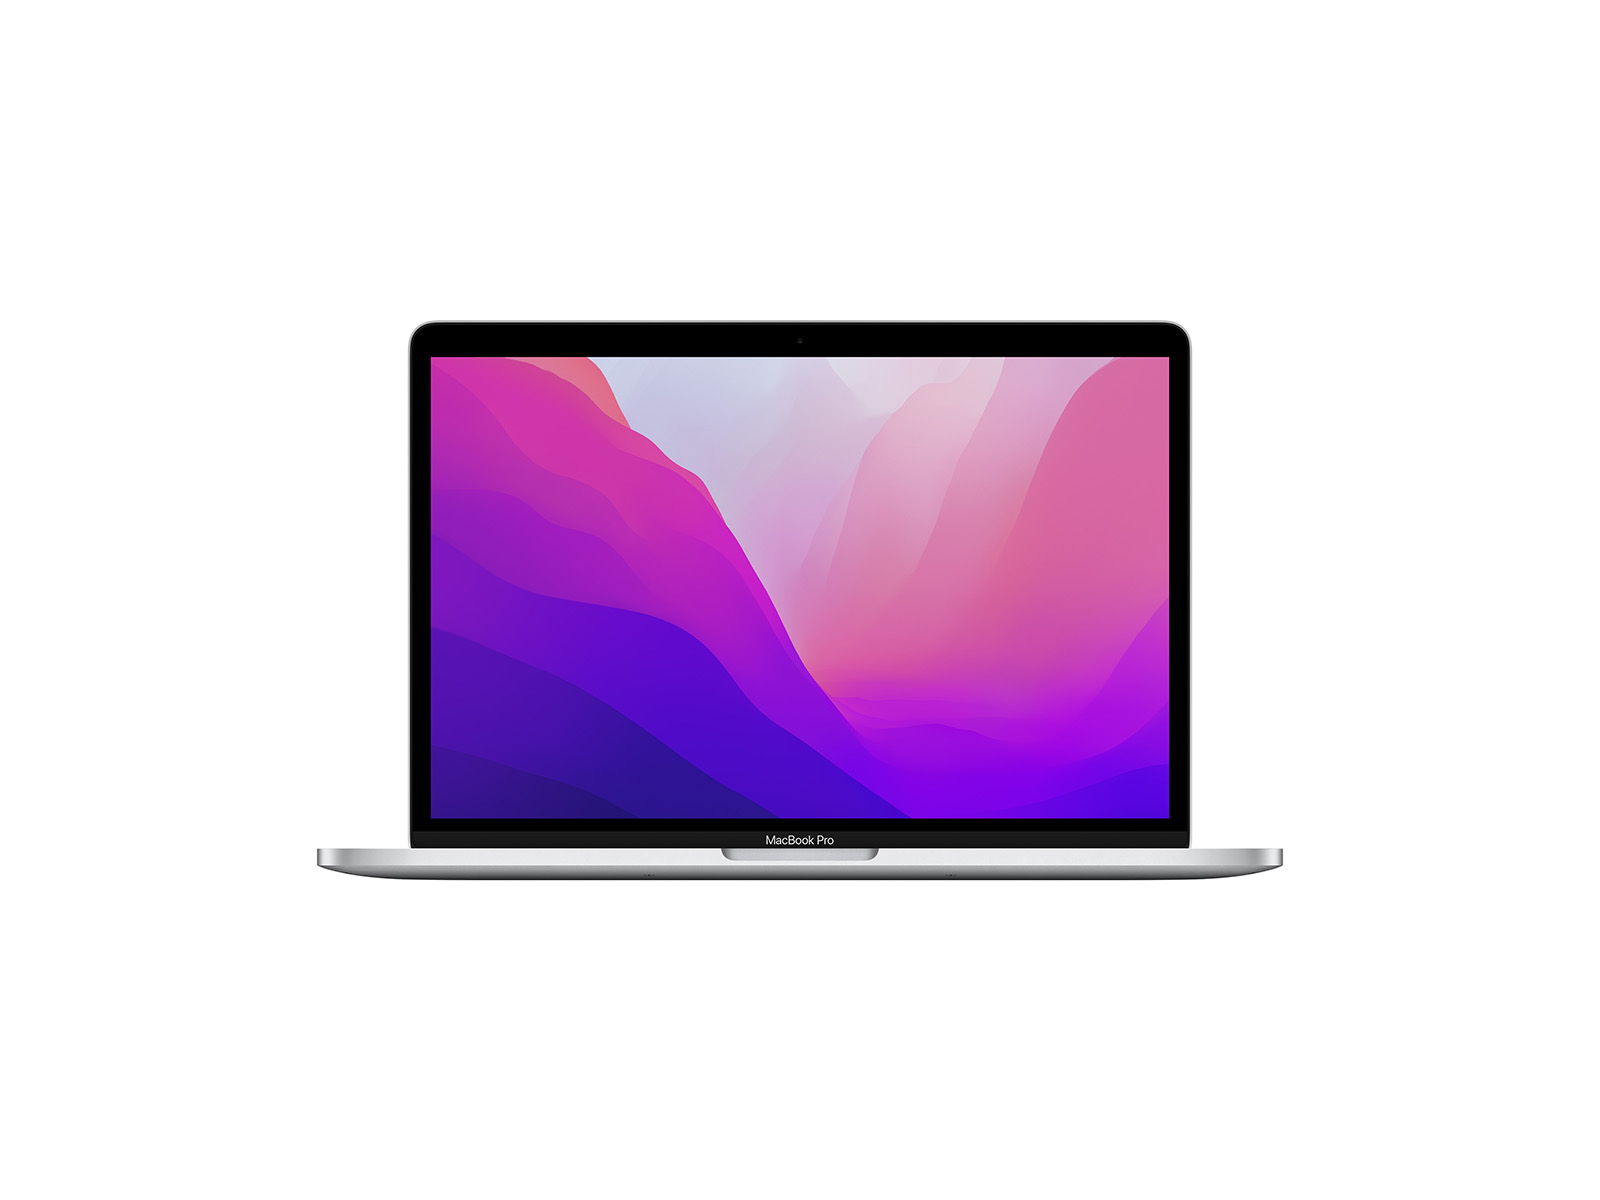 Get A Refurbished MacBook Air For Under $380 And Save Hundreds